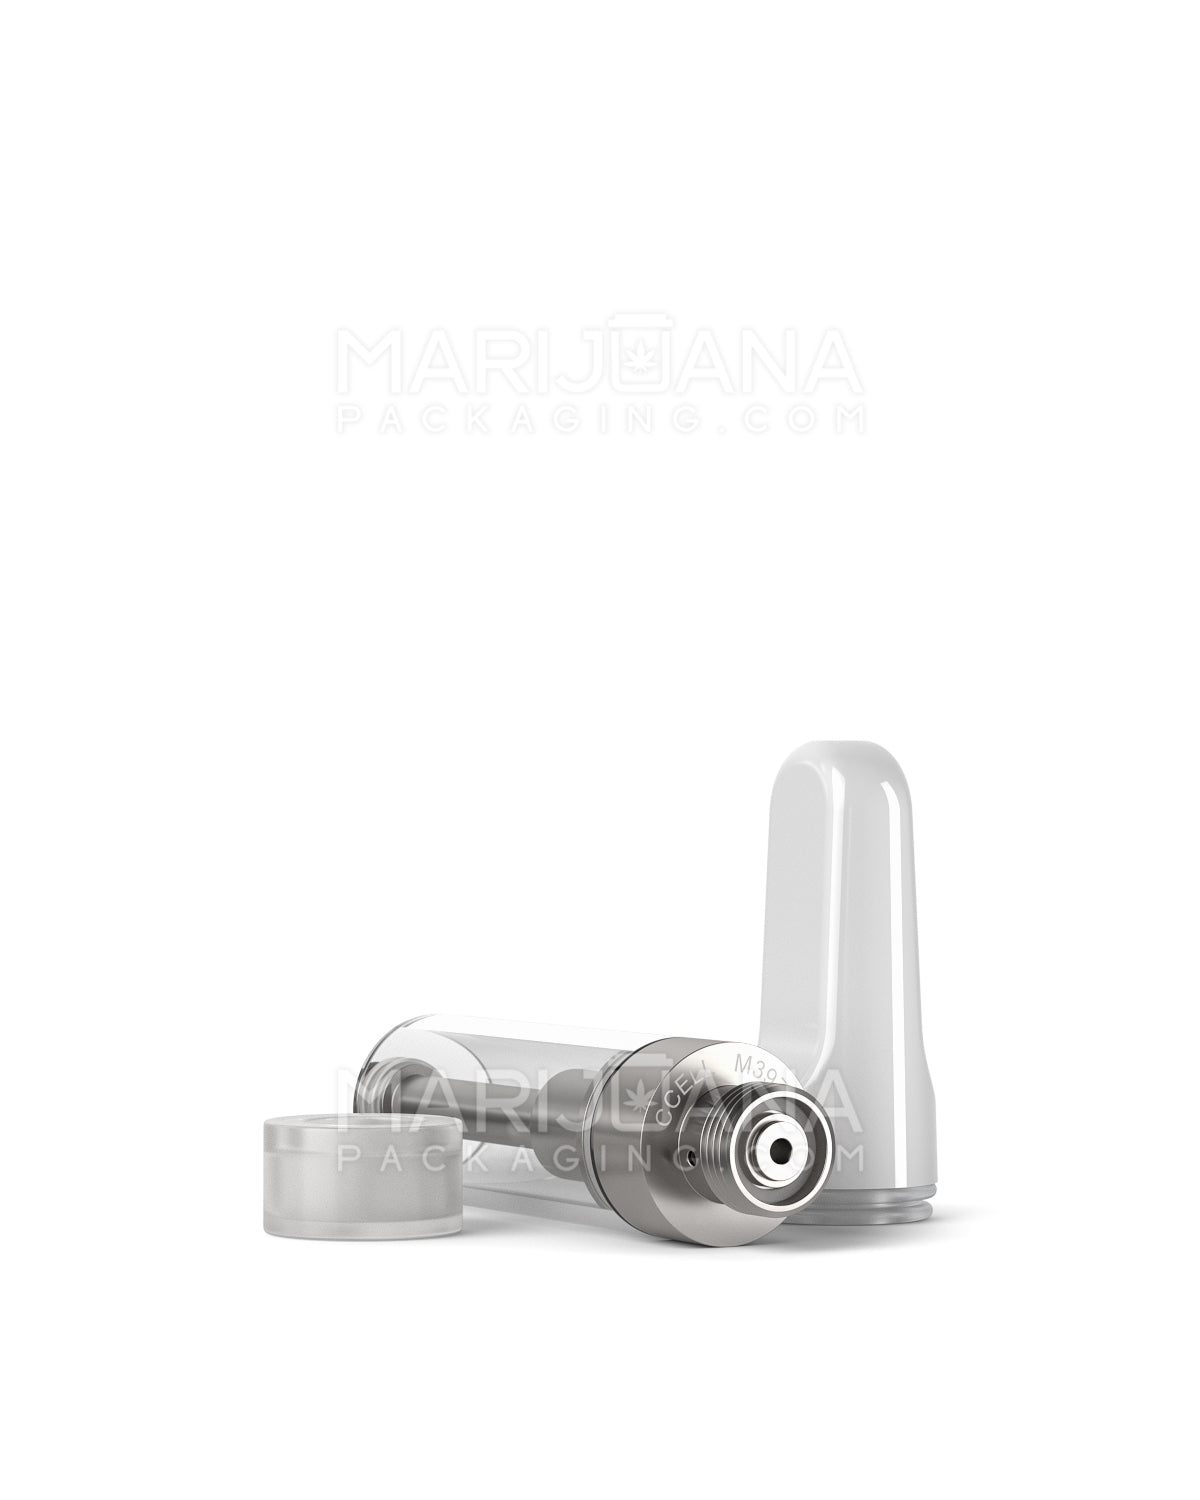 CCELL | Liquid6 Reactor Glass Vape Cartridge with White Ceramic Mouthpiece | 1mL - Screw On - 100 Count - 8